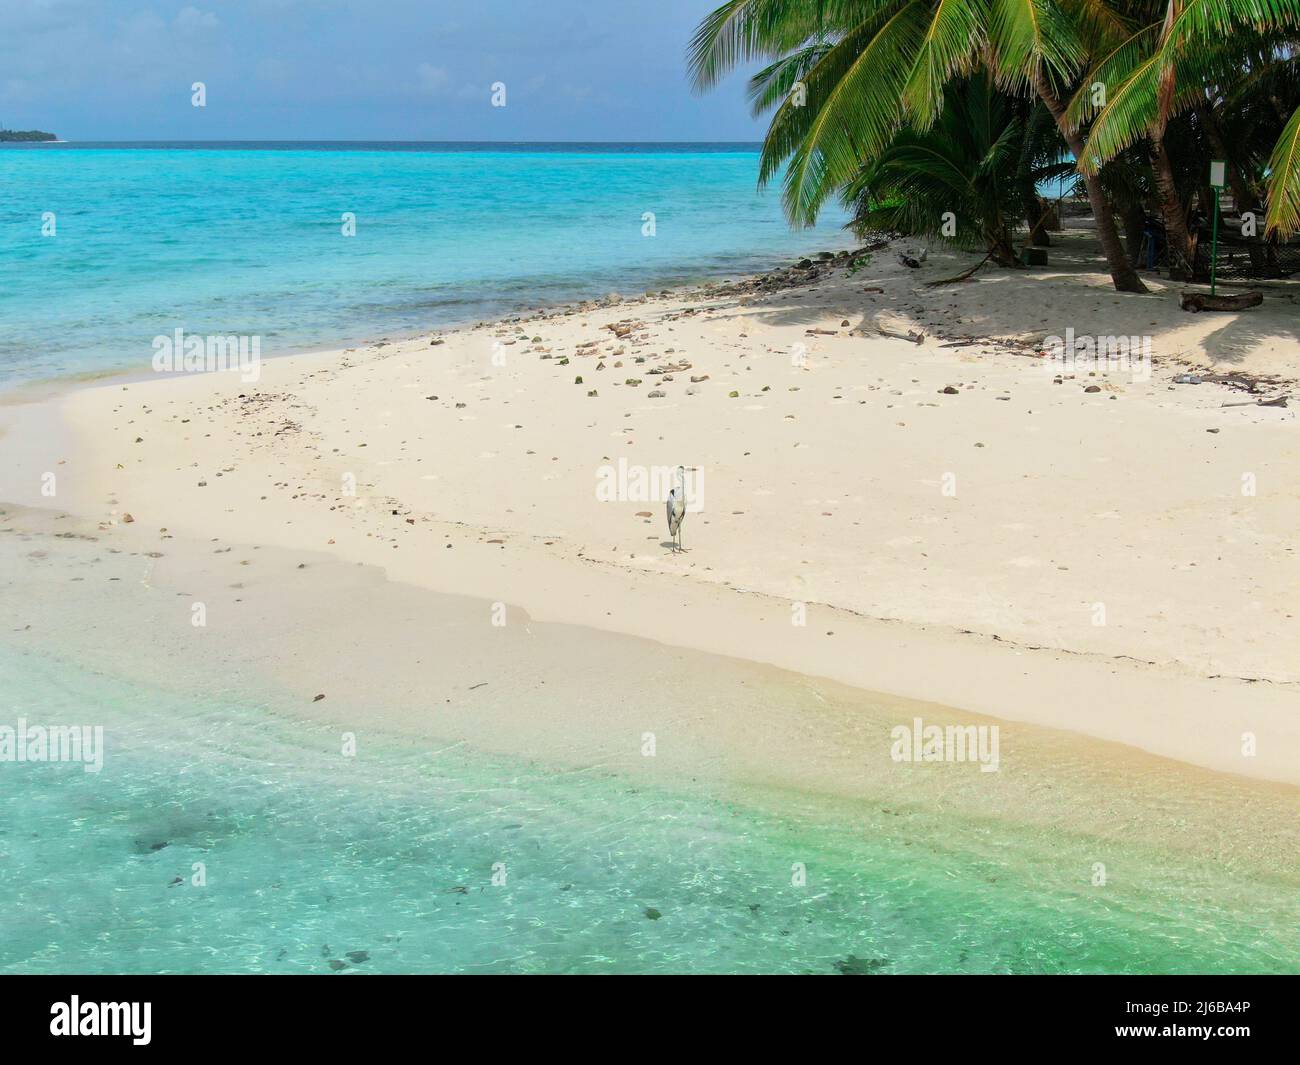 Blue Maldive islands seascape with geen foliage and bird Stock Photo